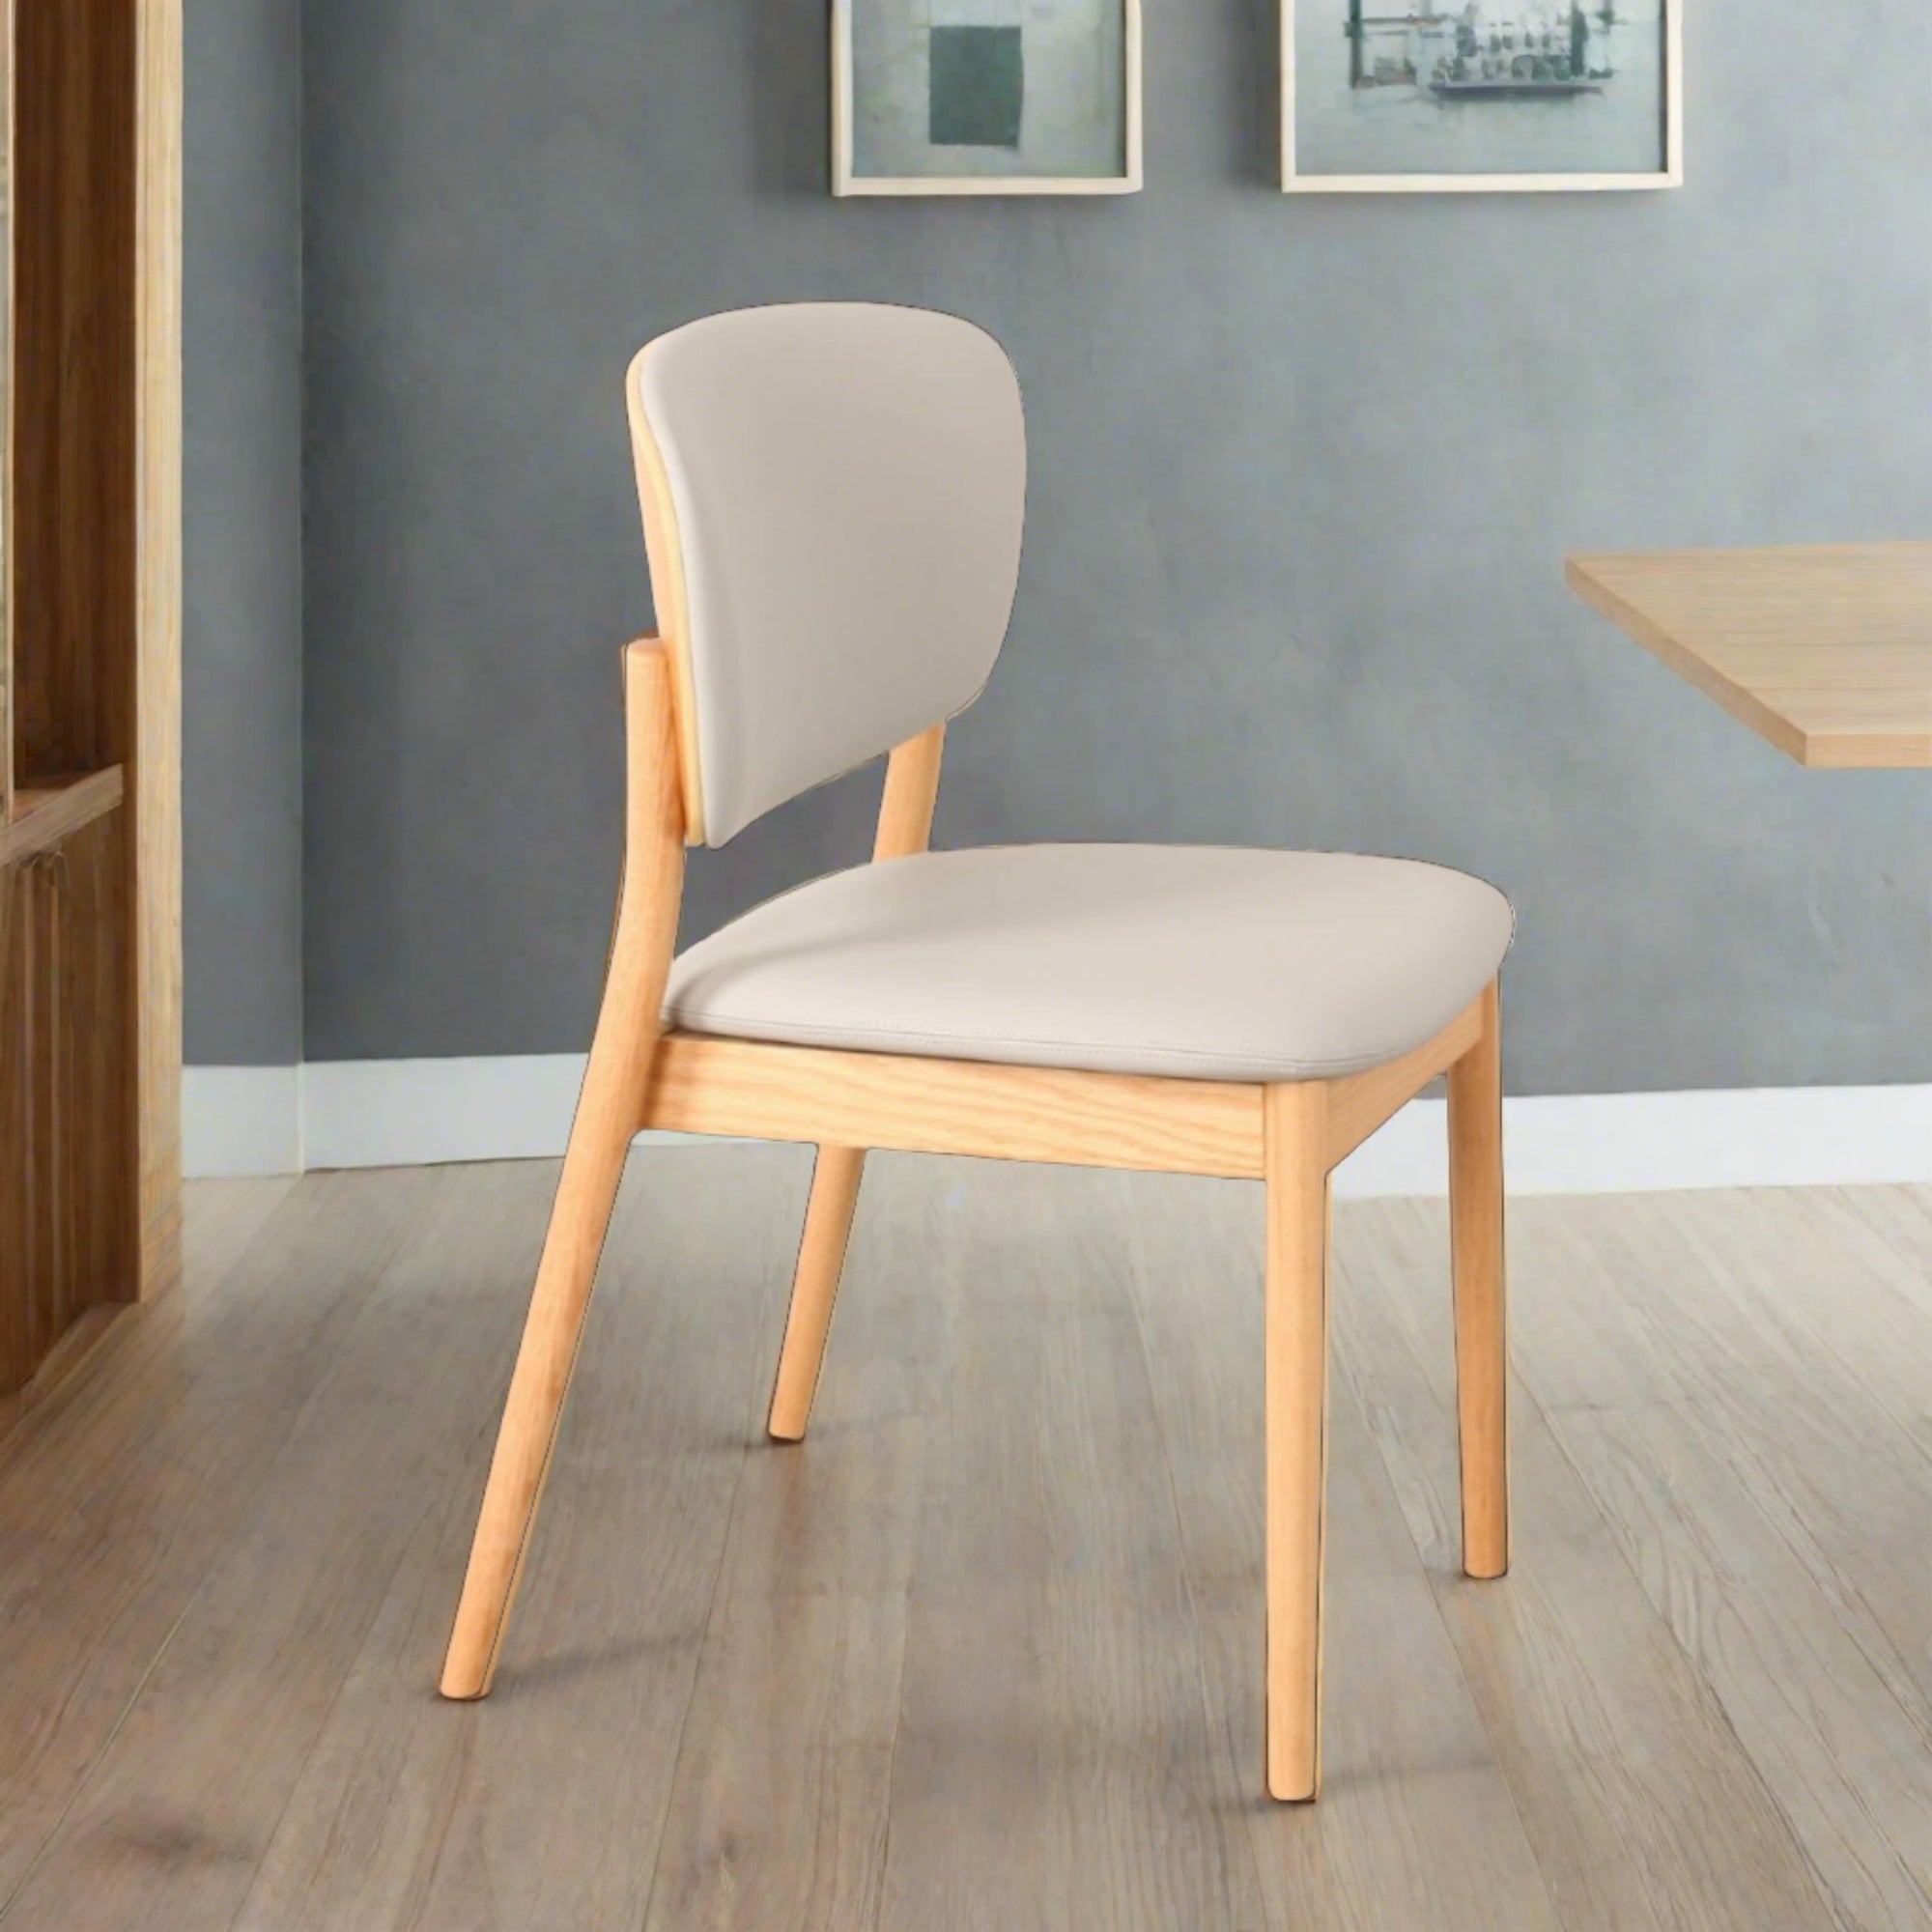 Custom Solid Wood Dining Chair - CH3820 picket and rail